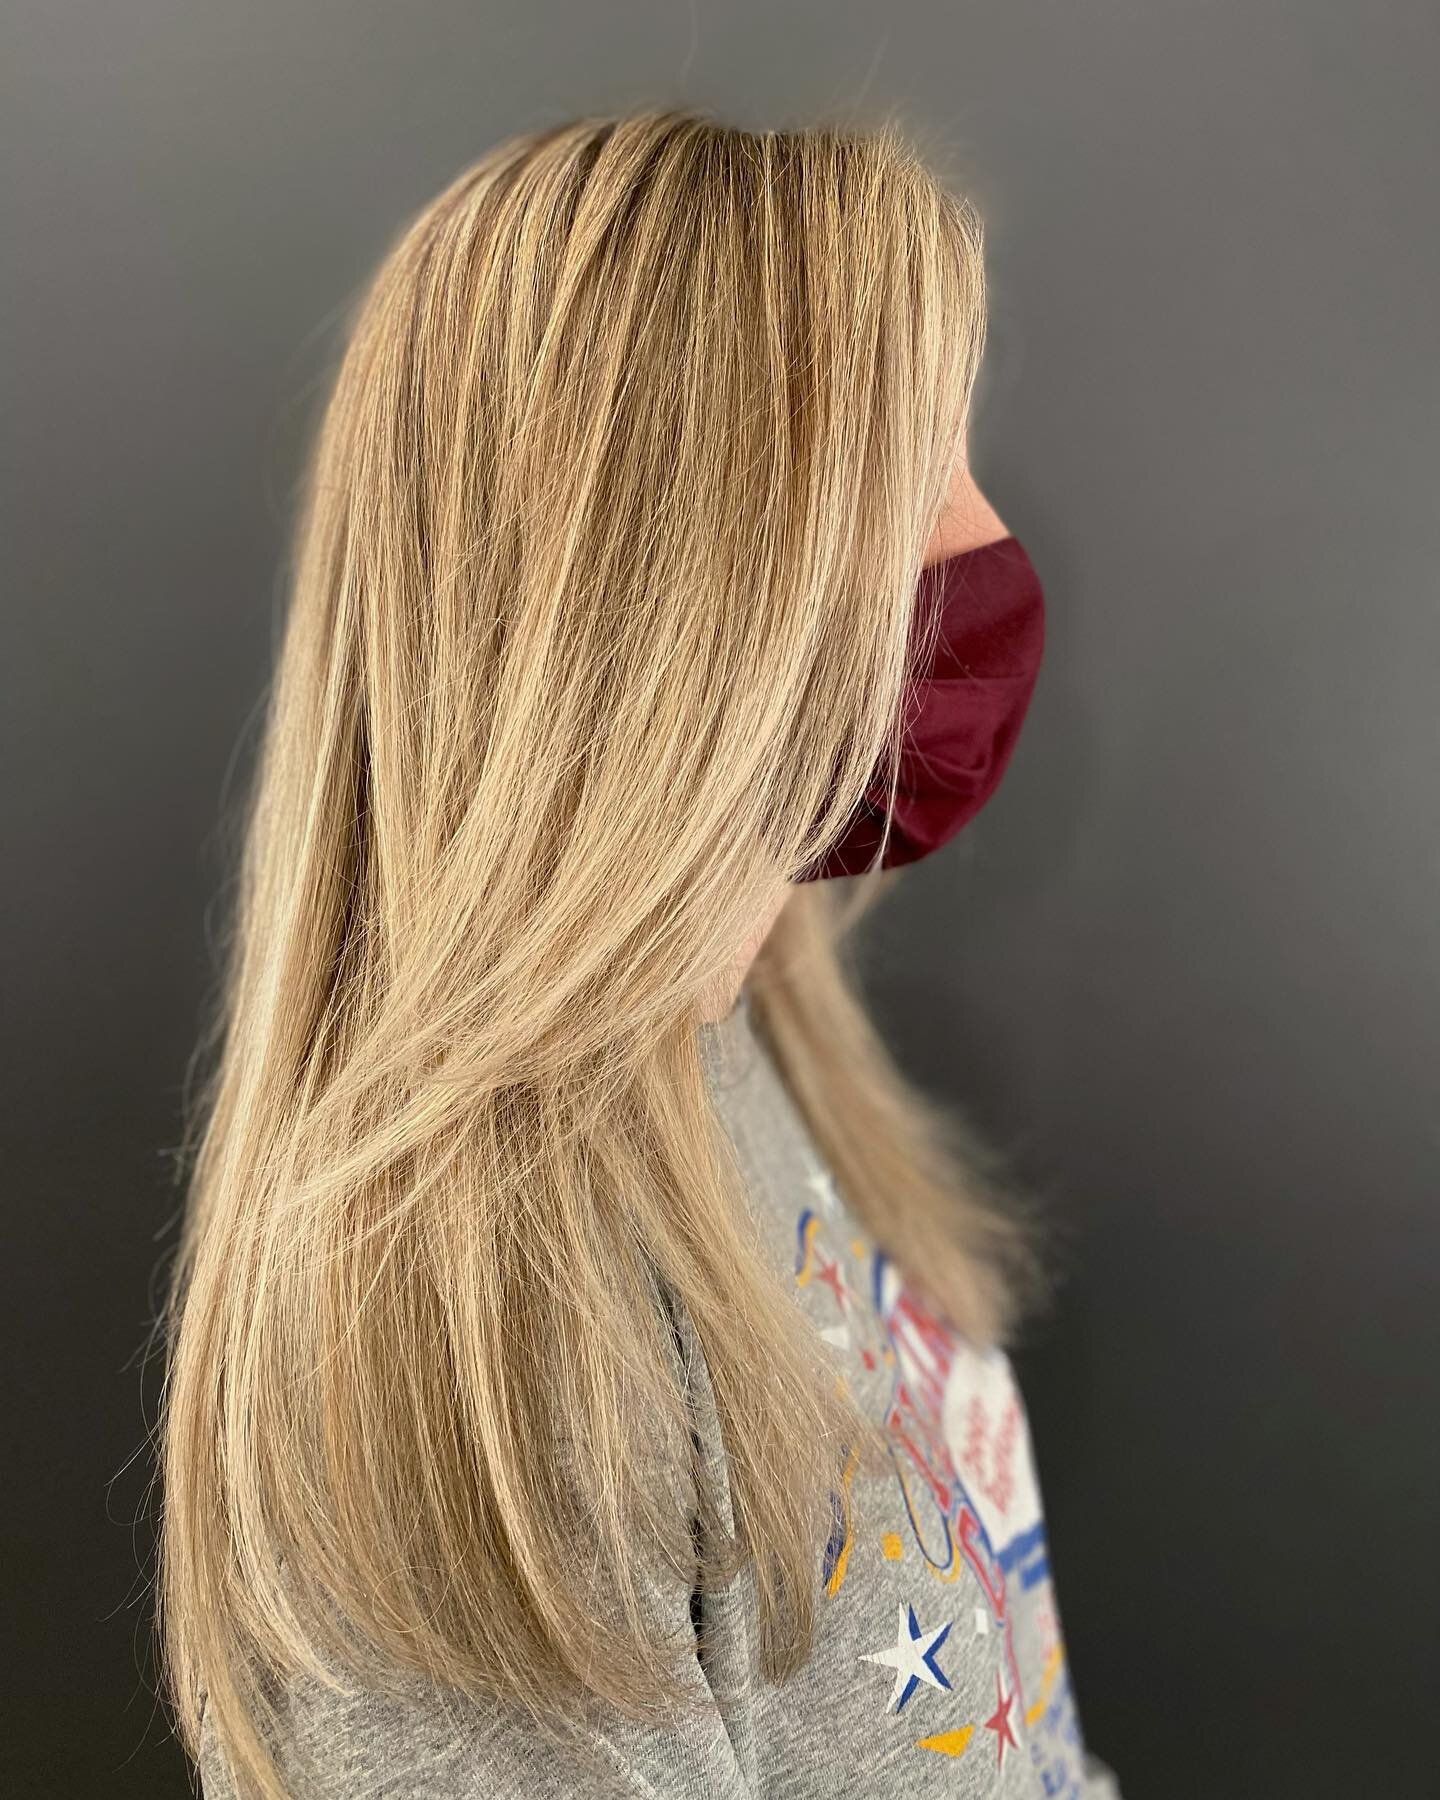 Punched up these locks from winter blonde to &ldquo;is it summer yet?&rdquo; Blonde with a mix of teasy lights and balayage

It&rsquo;s a delicate balance brightening pre-lightened hair and my priority is ALWAYS ✨healthy✨hair. 
Knowing this, it may t